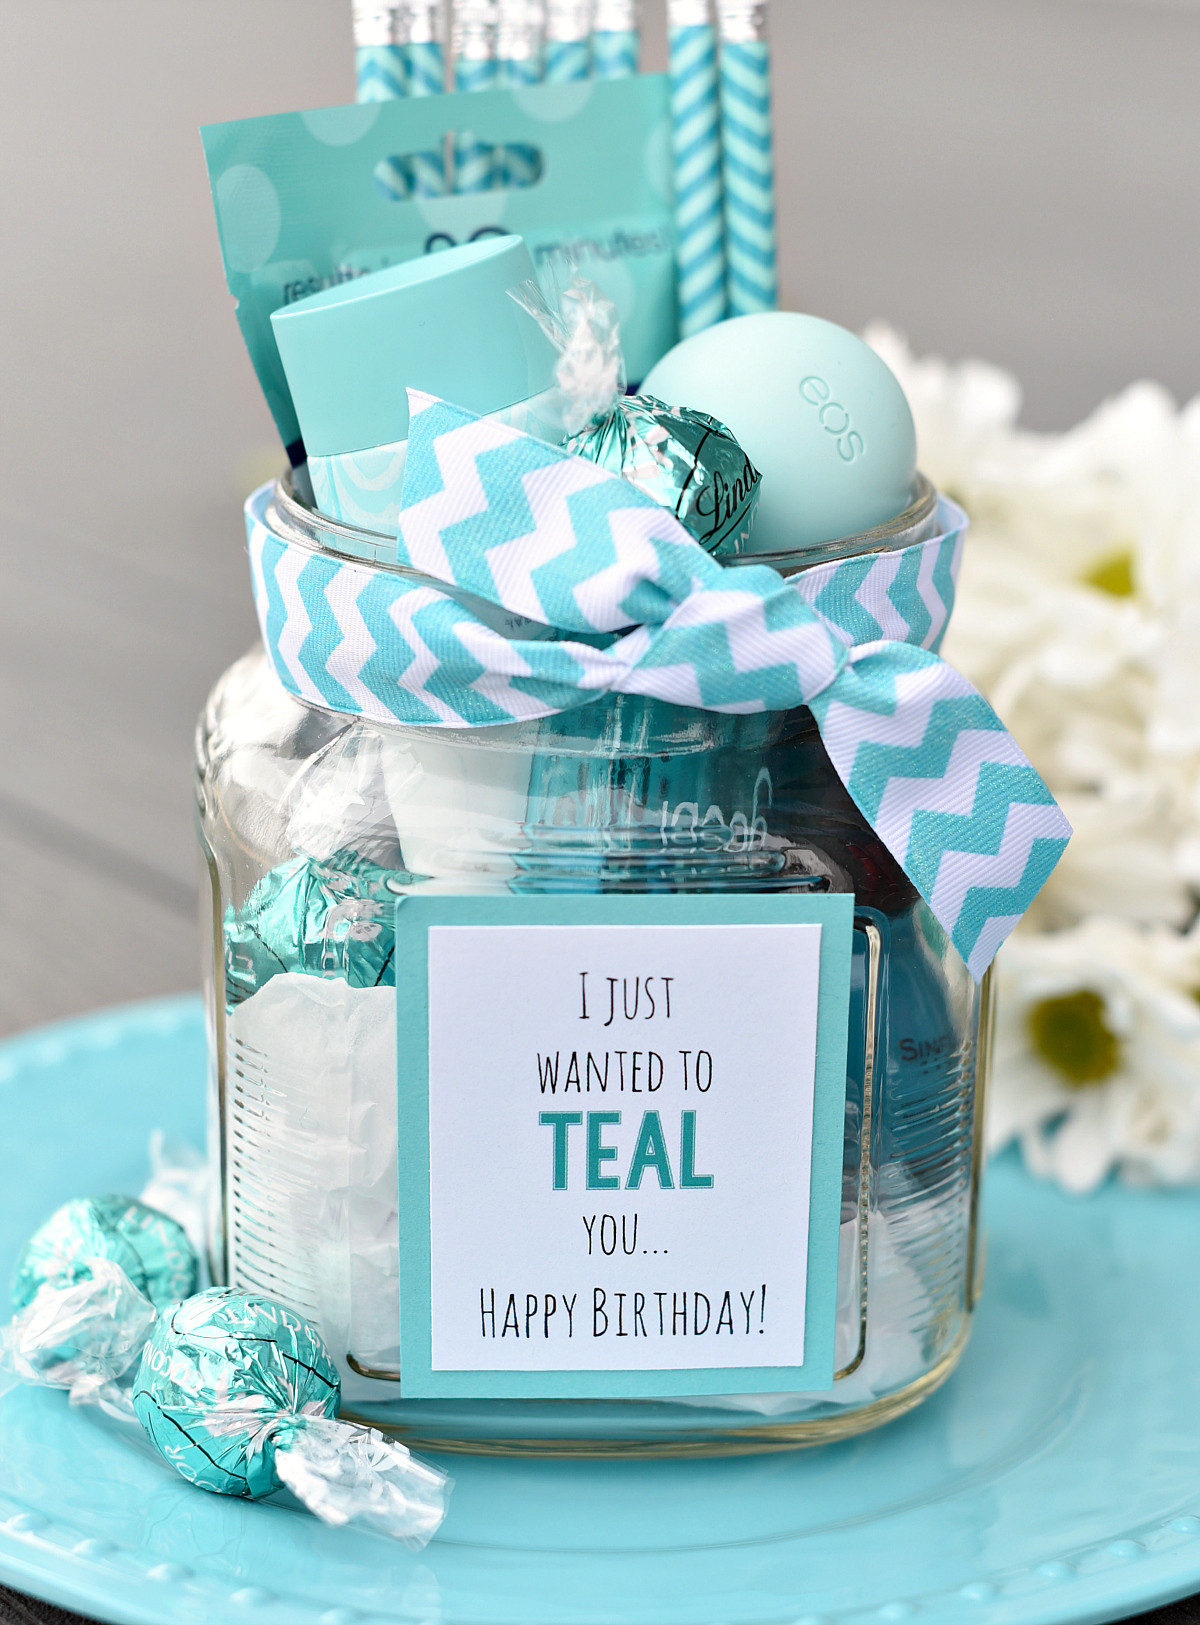 Birthday Gift Ideas For Woman Friend
 Teal Birthday Gift Idea for Friends – Fun Squared